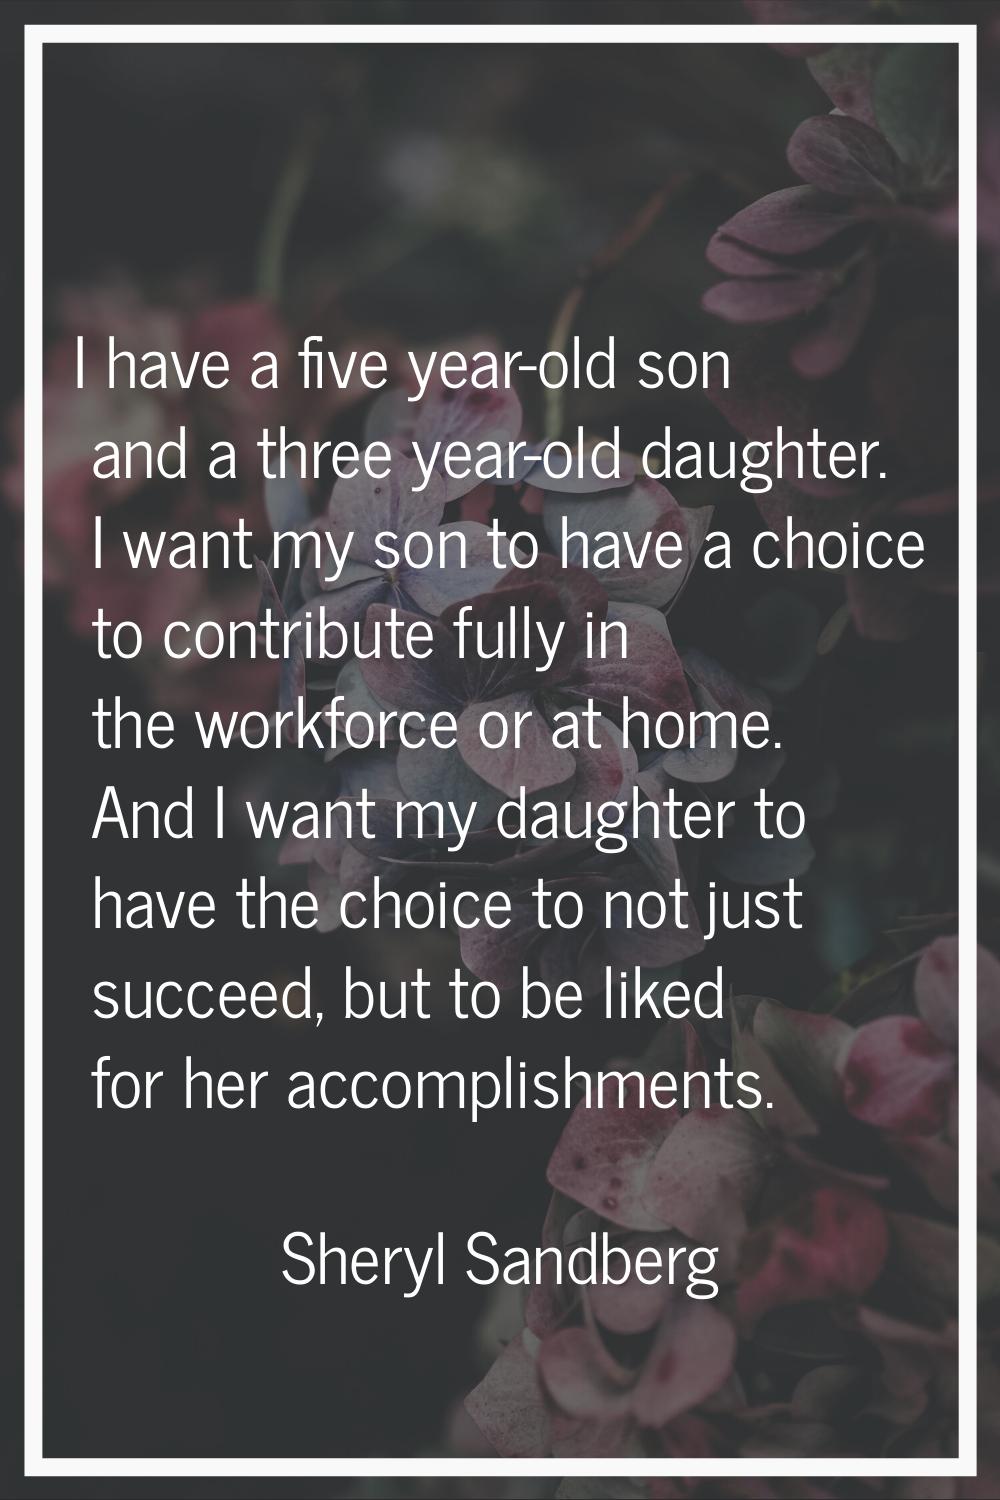 I have a five year-old son and a three year-old daughter. I want my son to have a choice to contrib